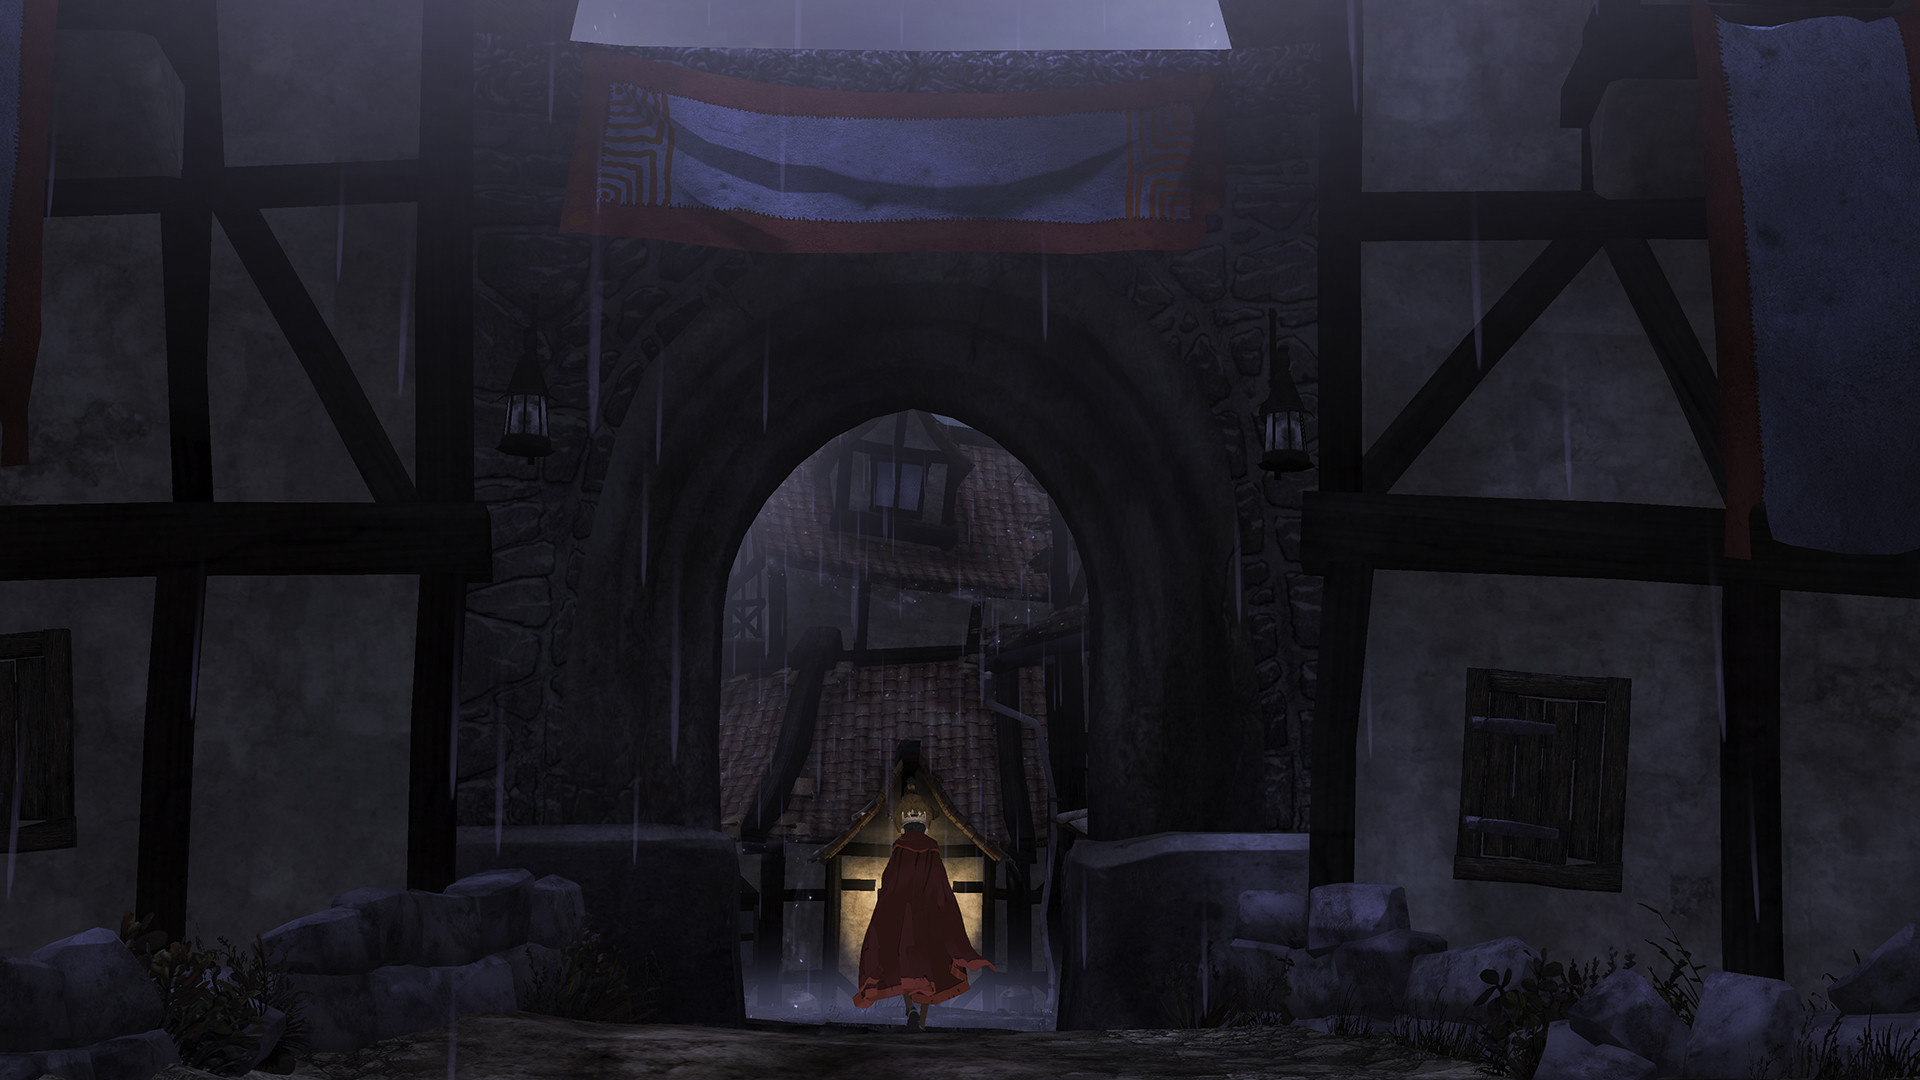 King's Quest Chapter 2 Rubble Without a Cause